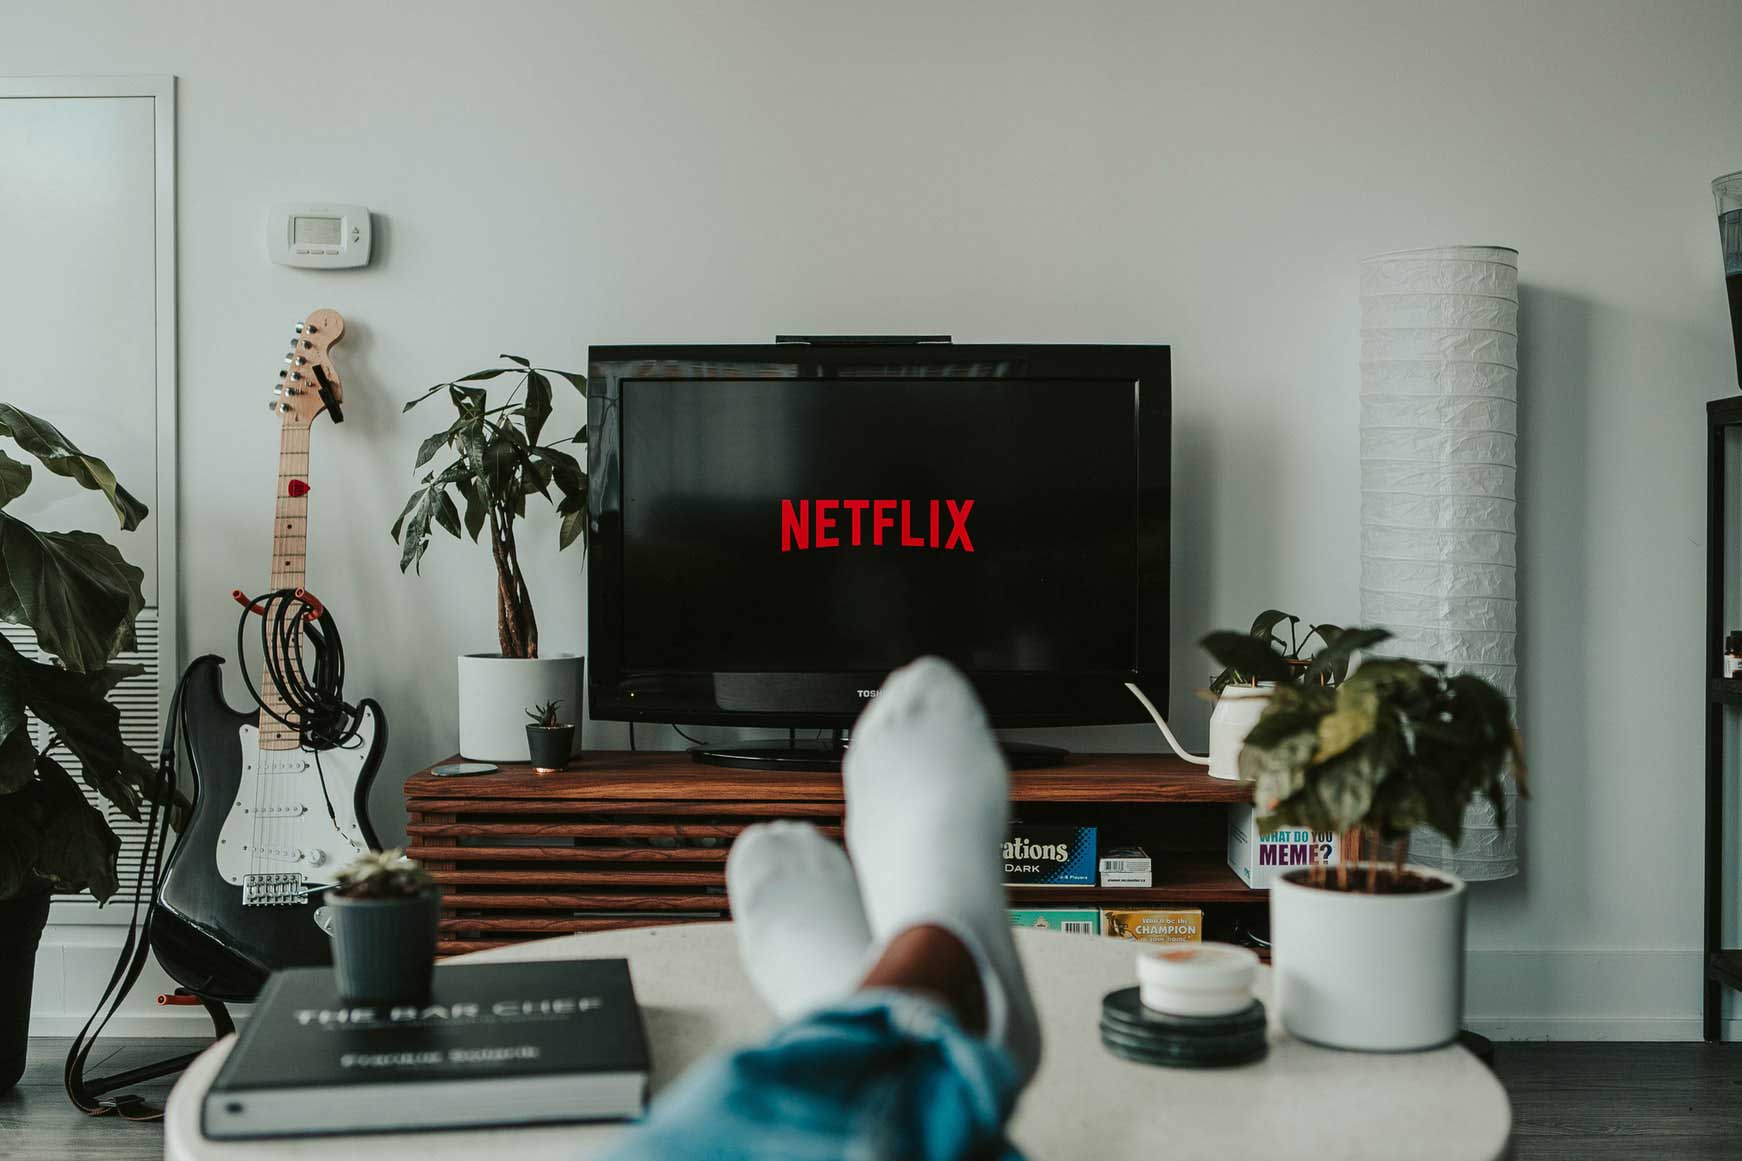 A photo of a person watching Netflix on their TV.